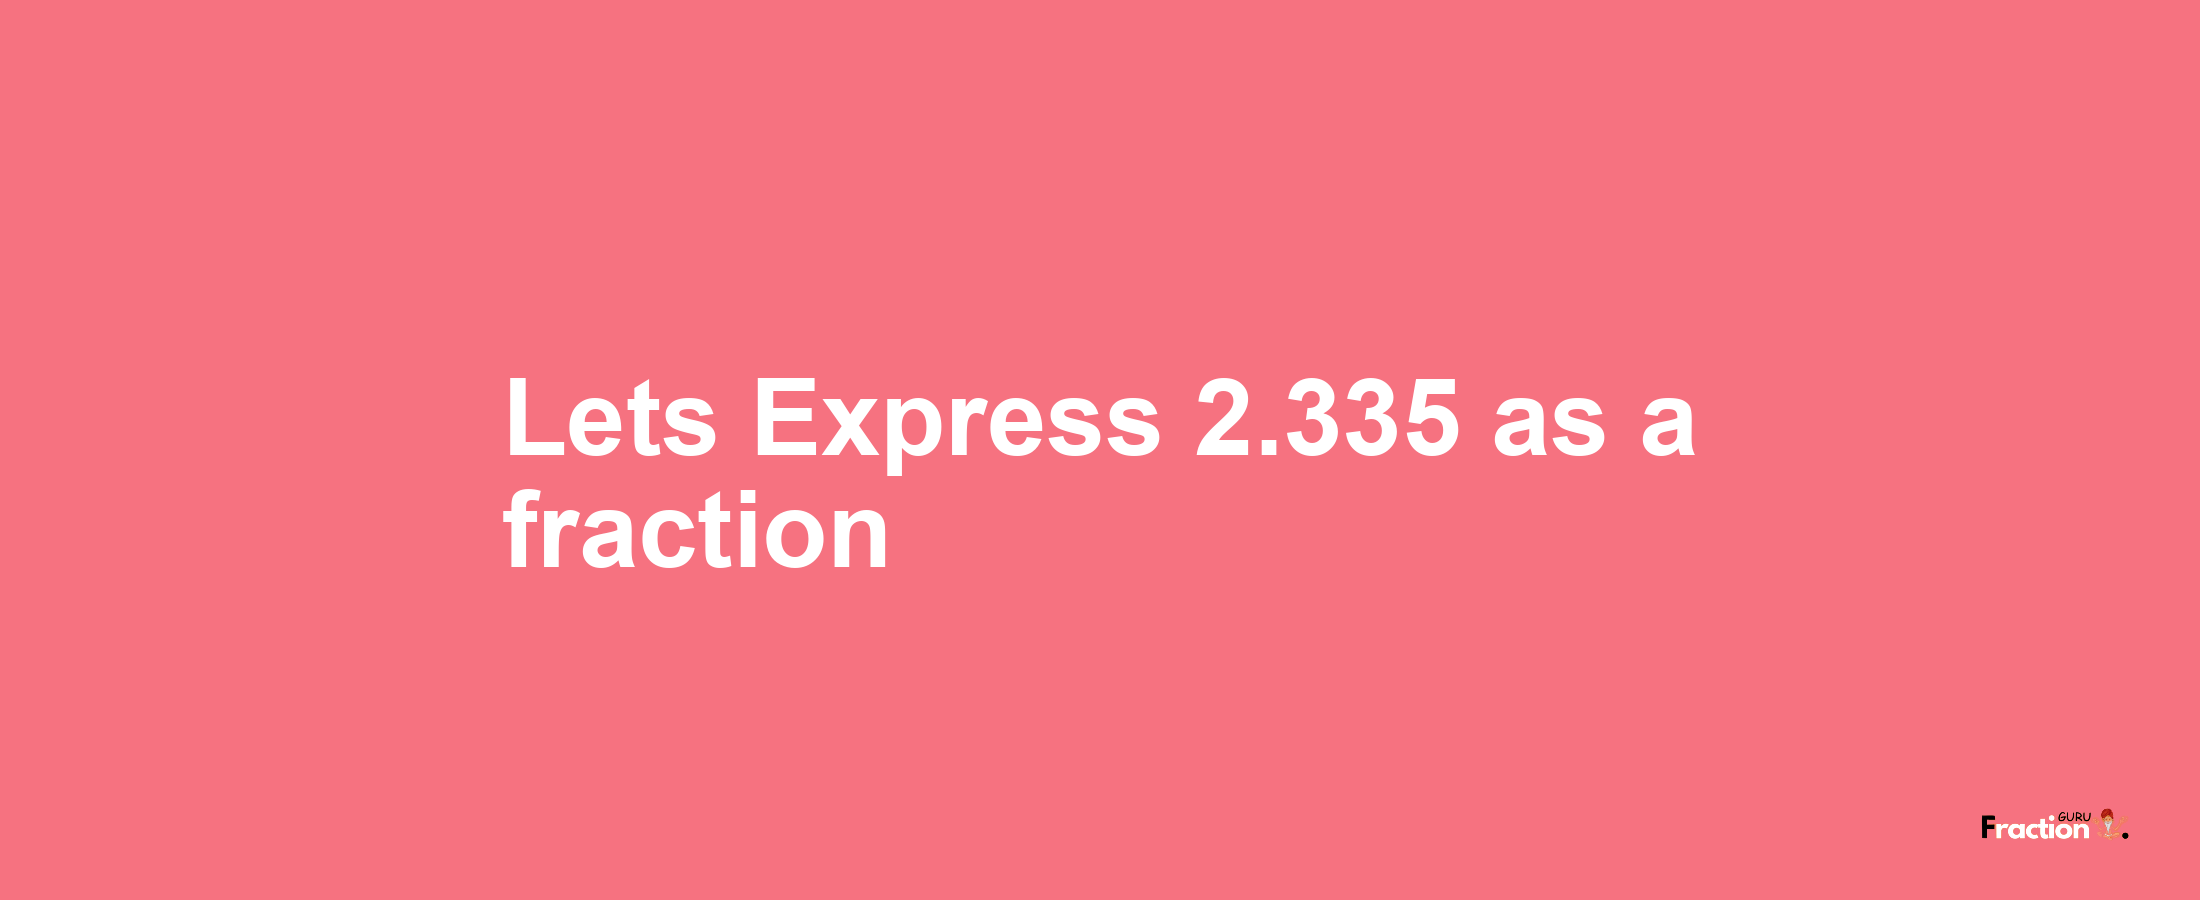 Lets Express 2.335 as afraction